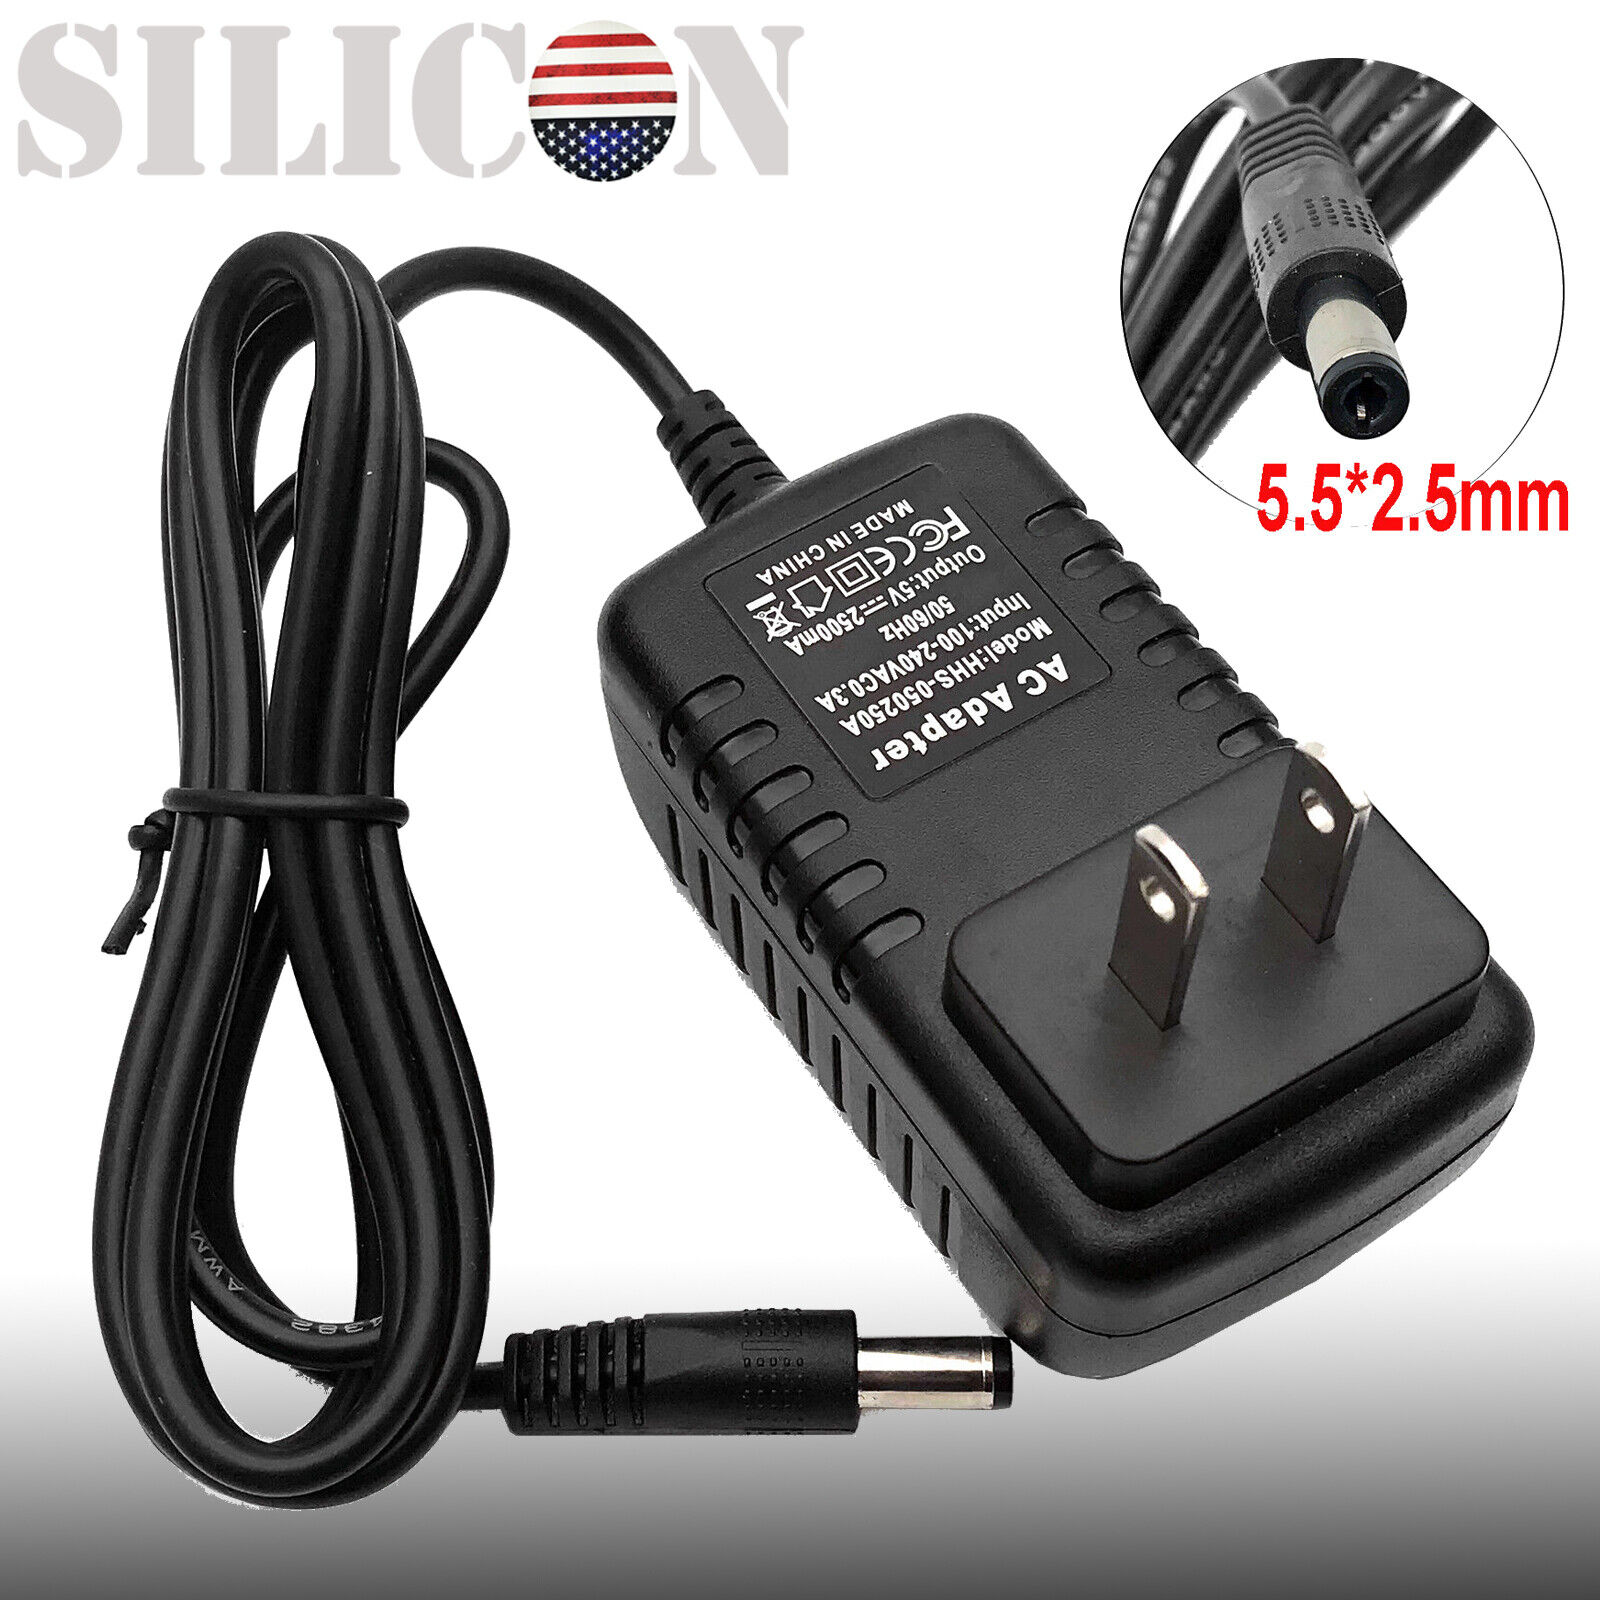 5V 2.5A AC Adapter Wall Charger For Cisco SPA501G SPA502G SPA504G Power Supply